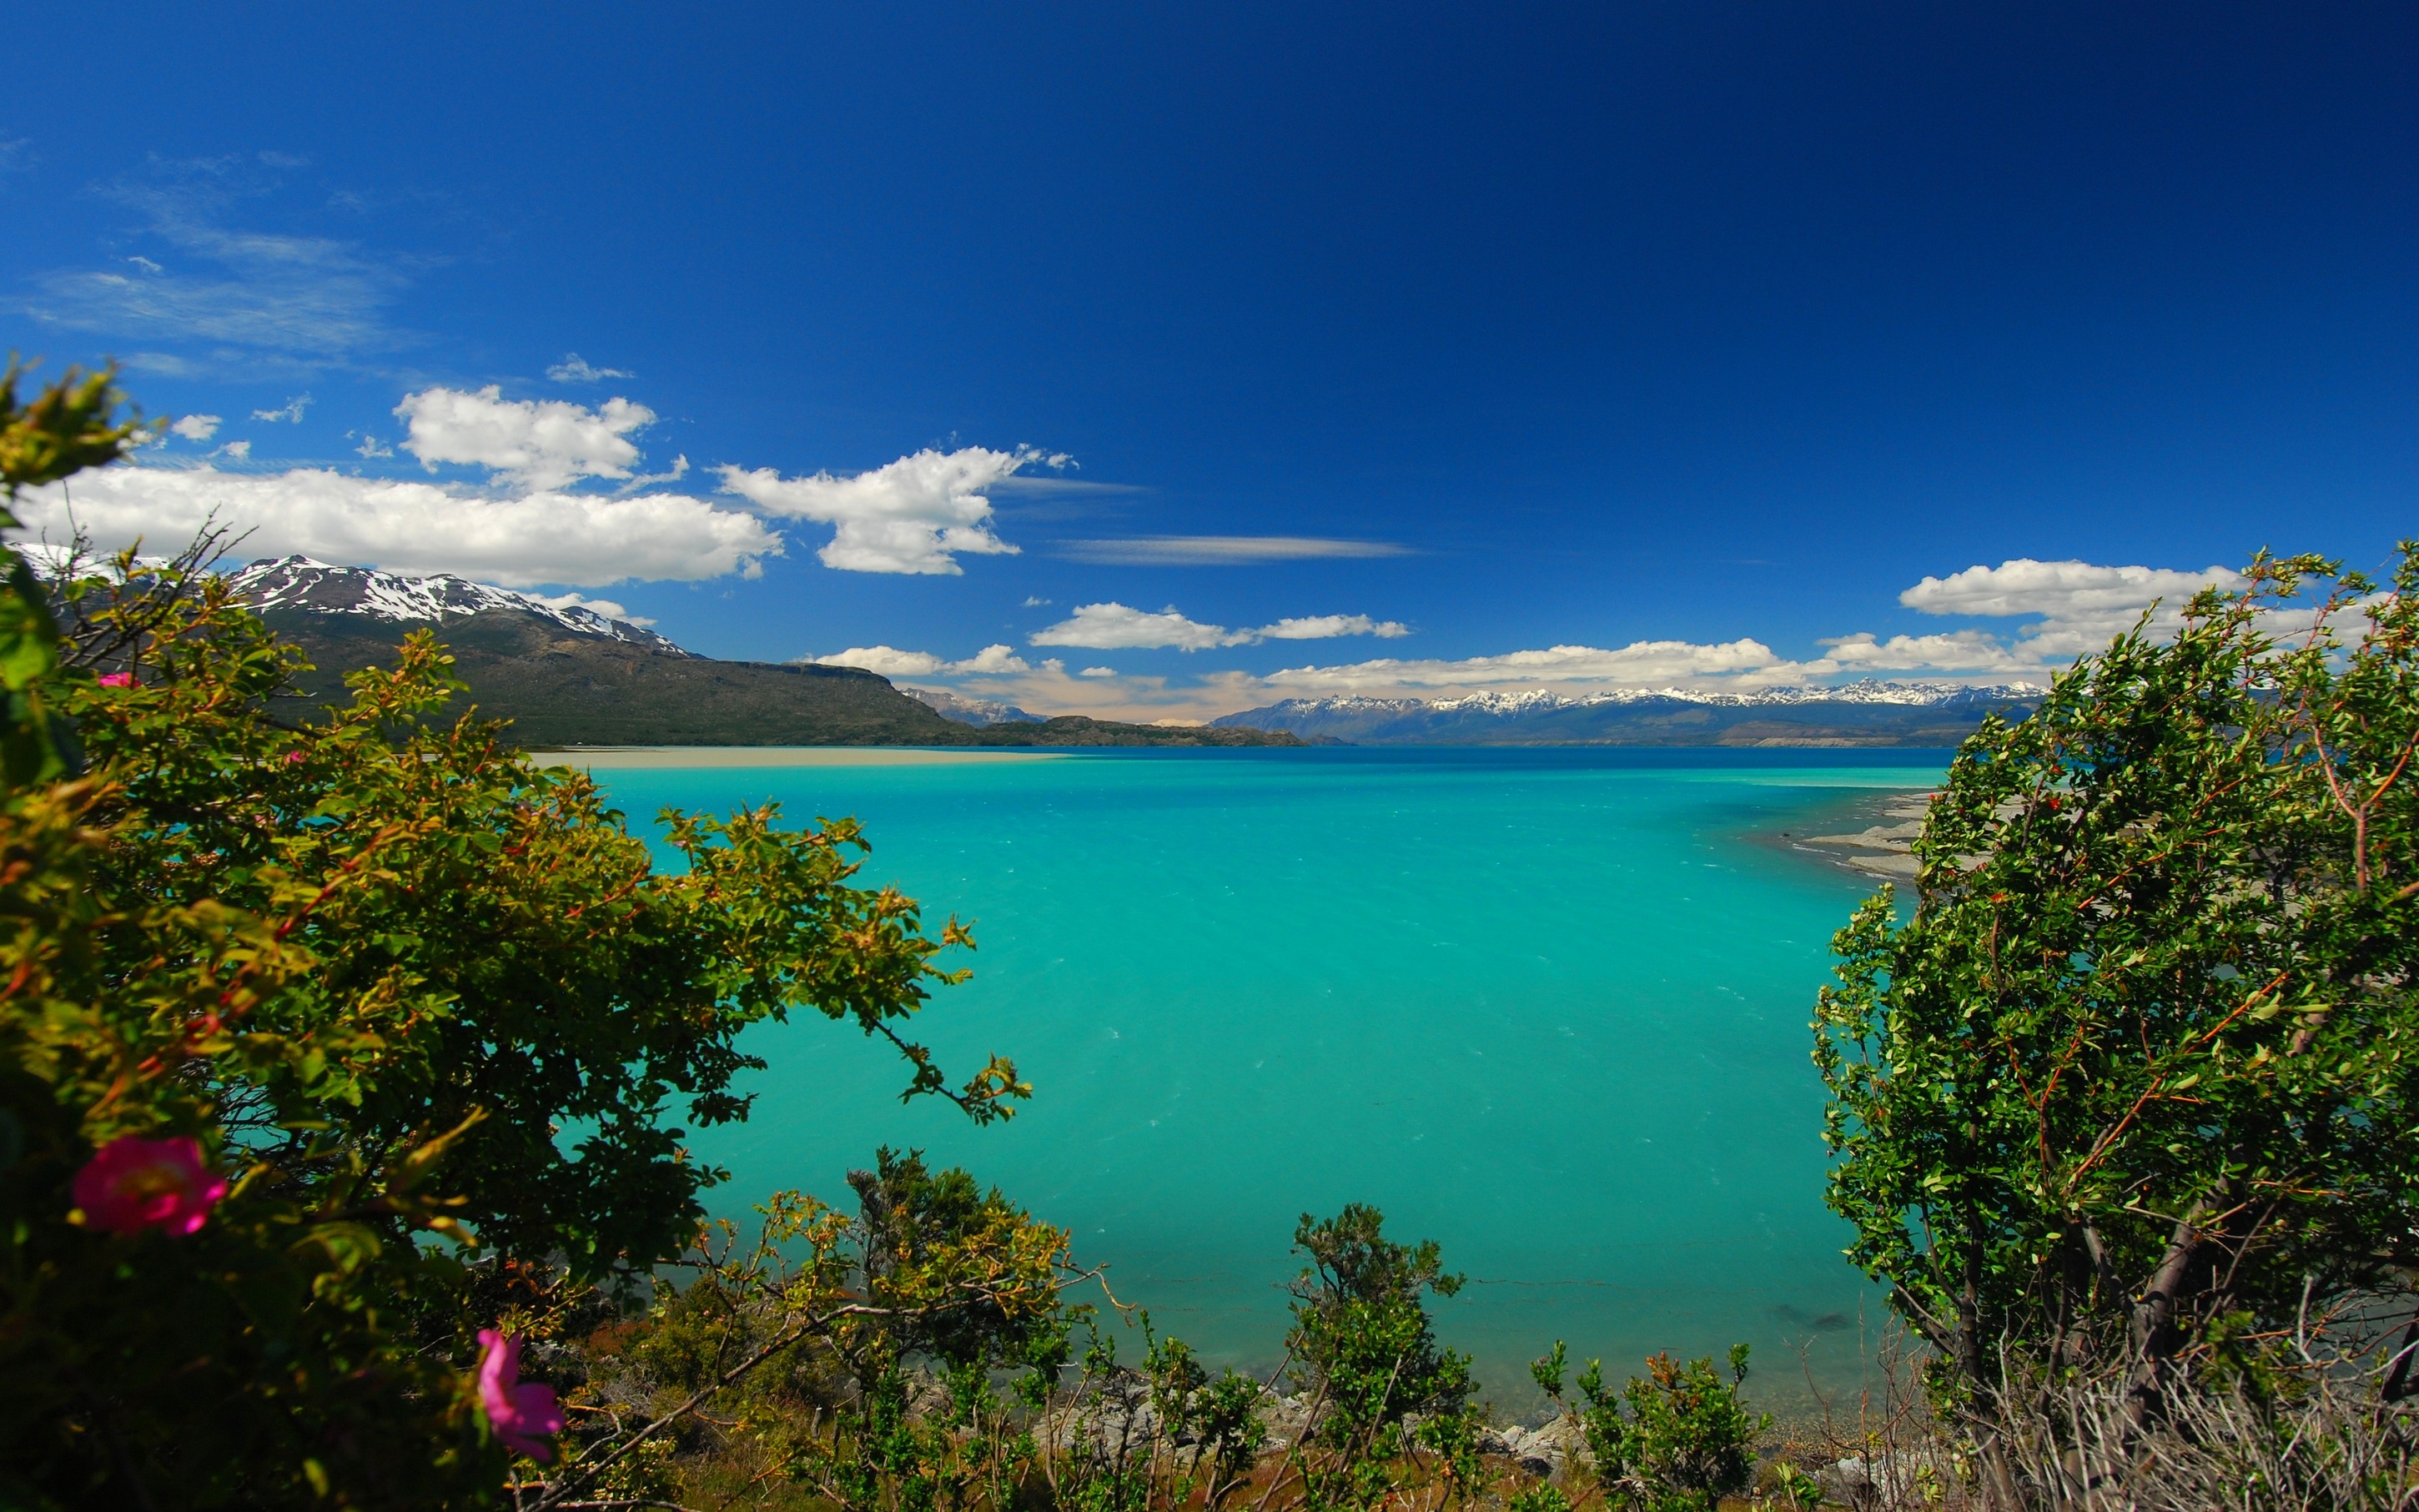 Nature Photography Landscape Lake Turquoise Water Trees Mountains Wildflowers Wind Clouds Patagonia  2900x1813